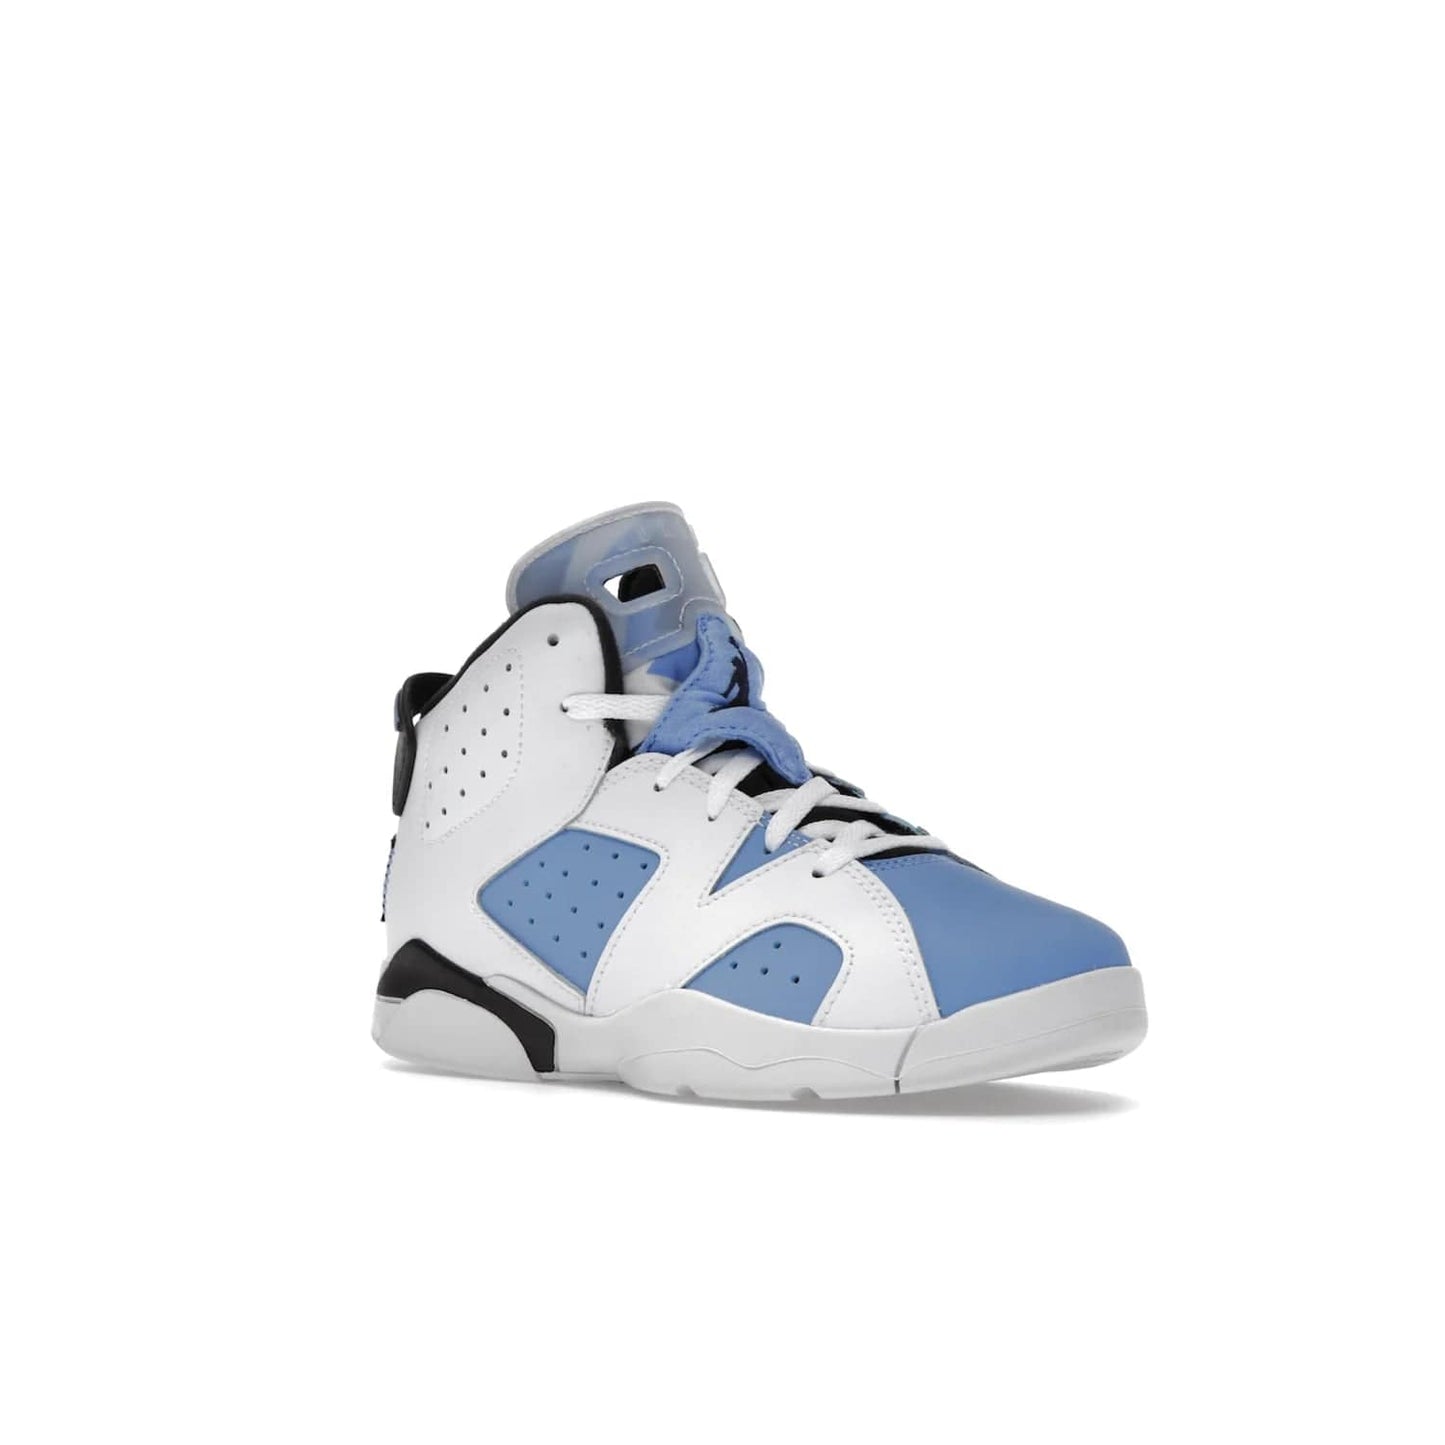 Jordan 6 Retro UNC White (PS) - Image 5 - Only at www.BallersClubKickz.com - The Air Jordan 6 Retro UNC White PS celebrates Michael Jordan's alma mater, the University of North Carolina. It features a classic color-blocking of the iconic Jordan 6 Carmine and a stitched Jordan Team patch. This must-have sneaker released on April 27th, 2022. Referencing the university colors, get this shoe for a stylish and timeless style with university pride.